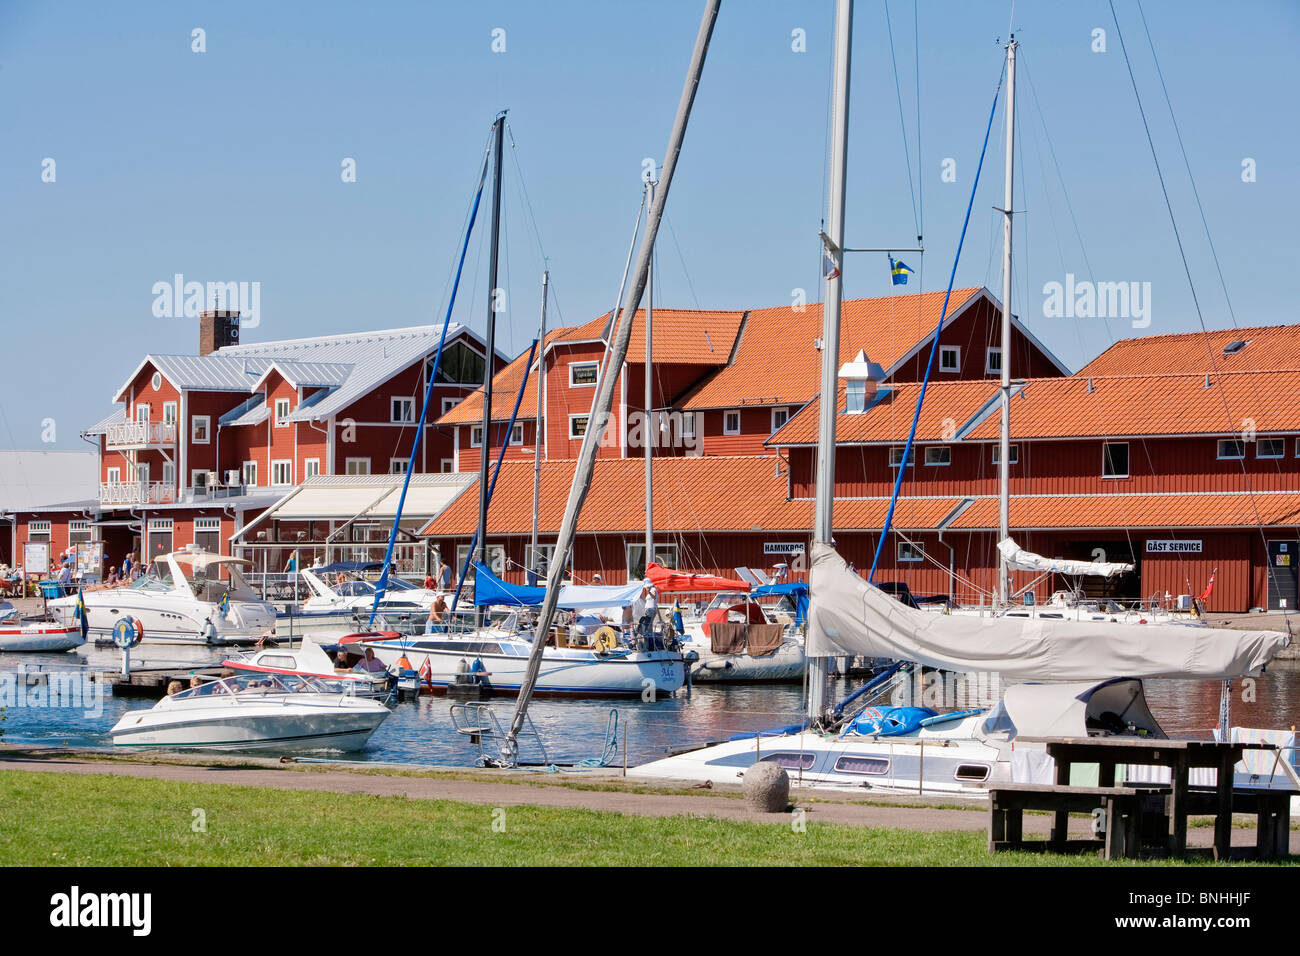 Sweden Motala Oestergötland Motalamotala Harbour Boat Boats Canal Canals City Contemporary Day Daytime Europe Exterior Göta Stock Photo